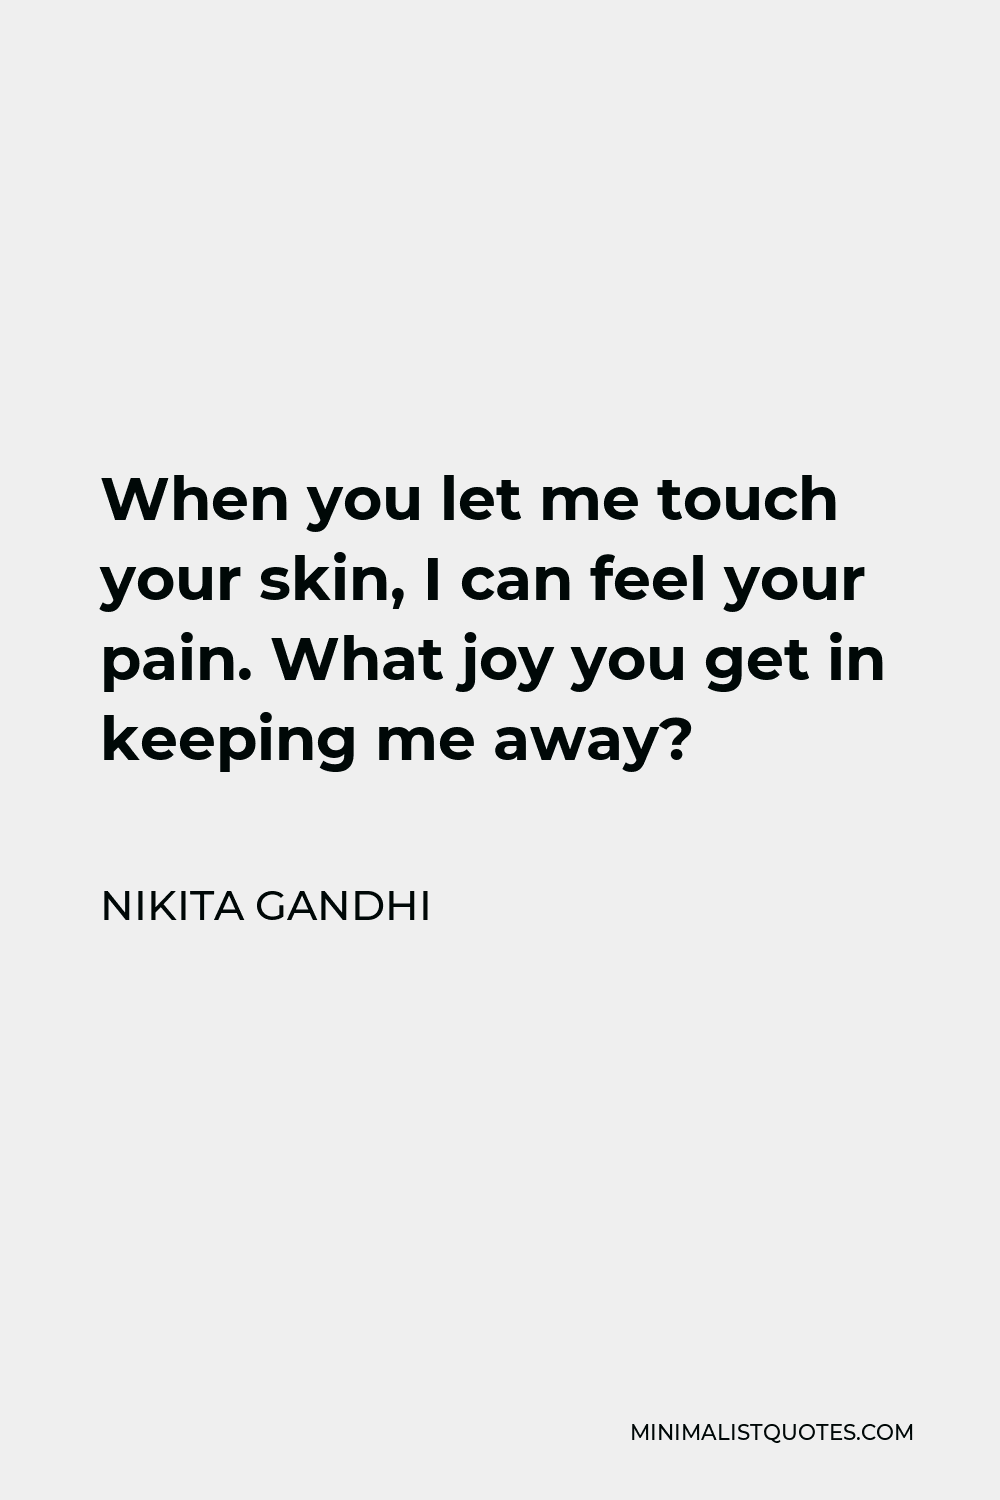 Nikita Gandhi Quote - When you let me touch your skin, I can feel your pain. What joy you get in keeping me away?